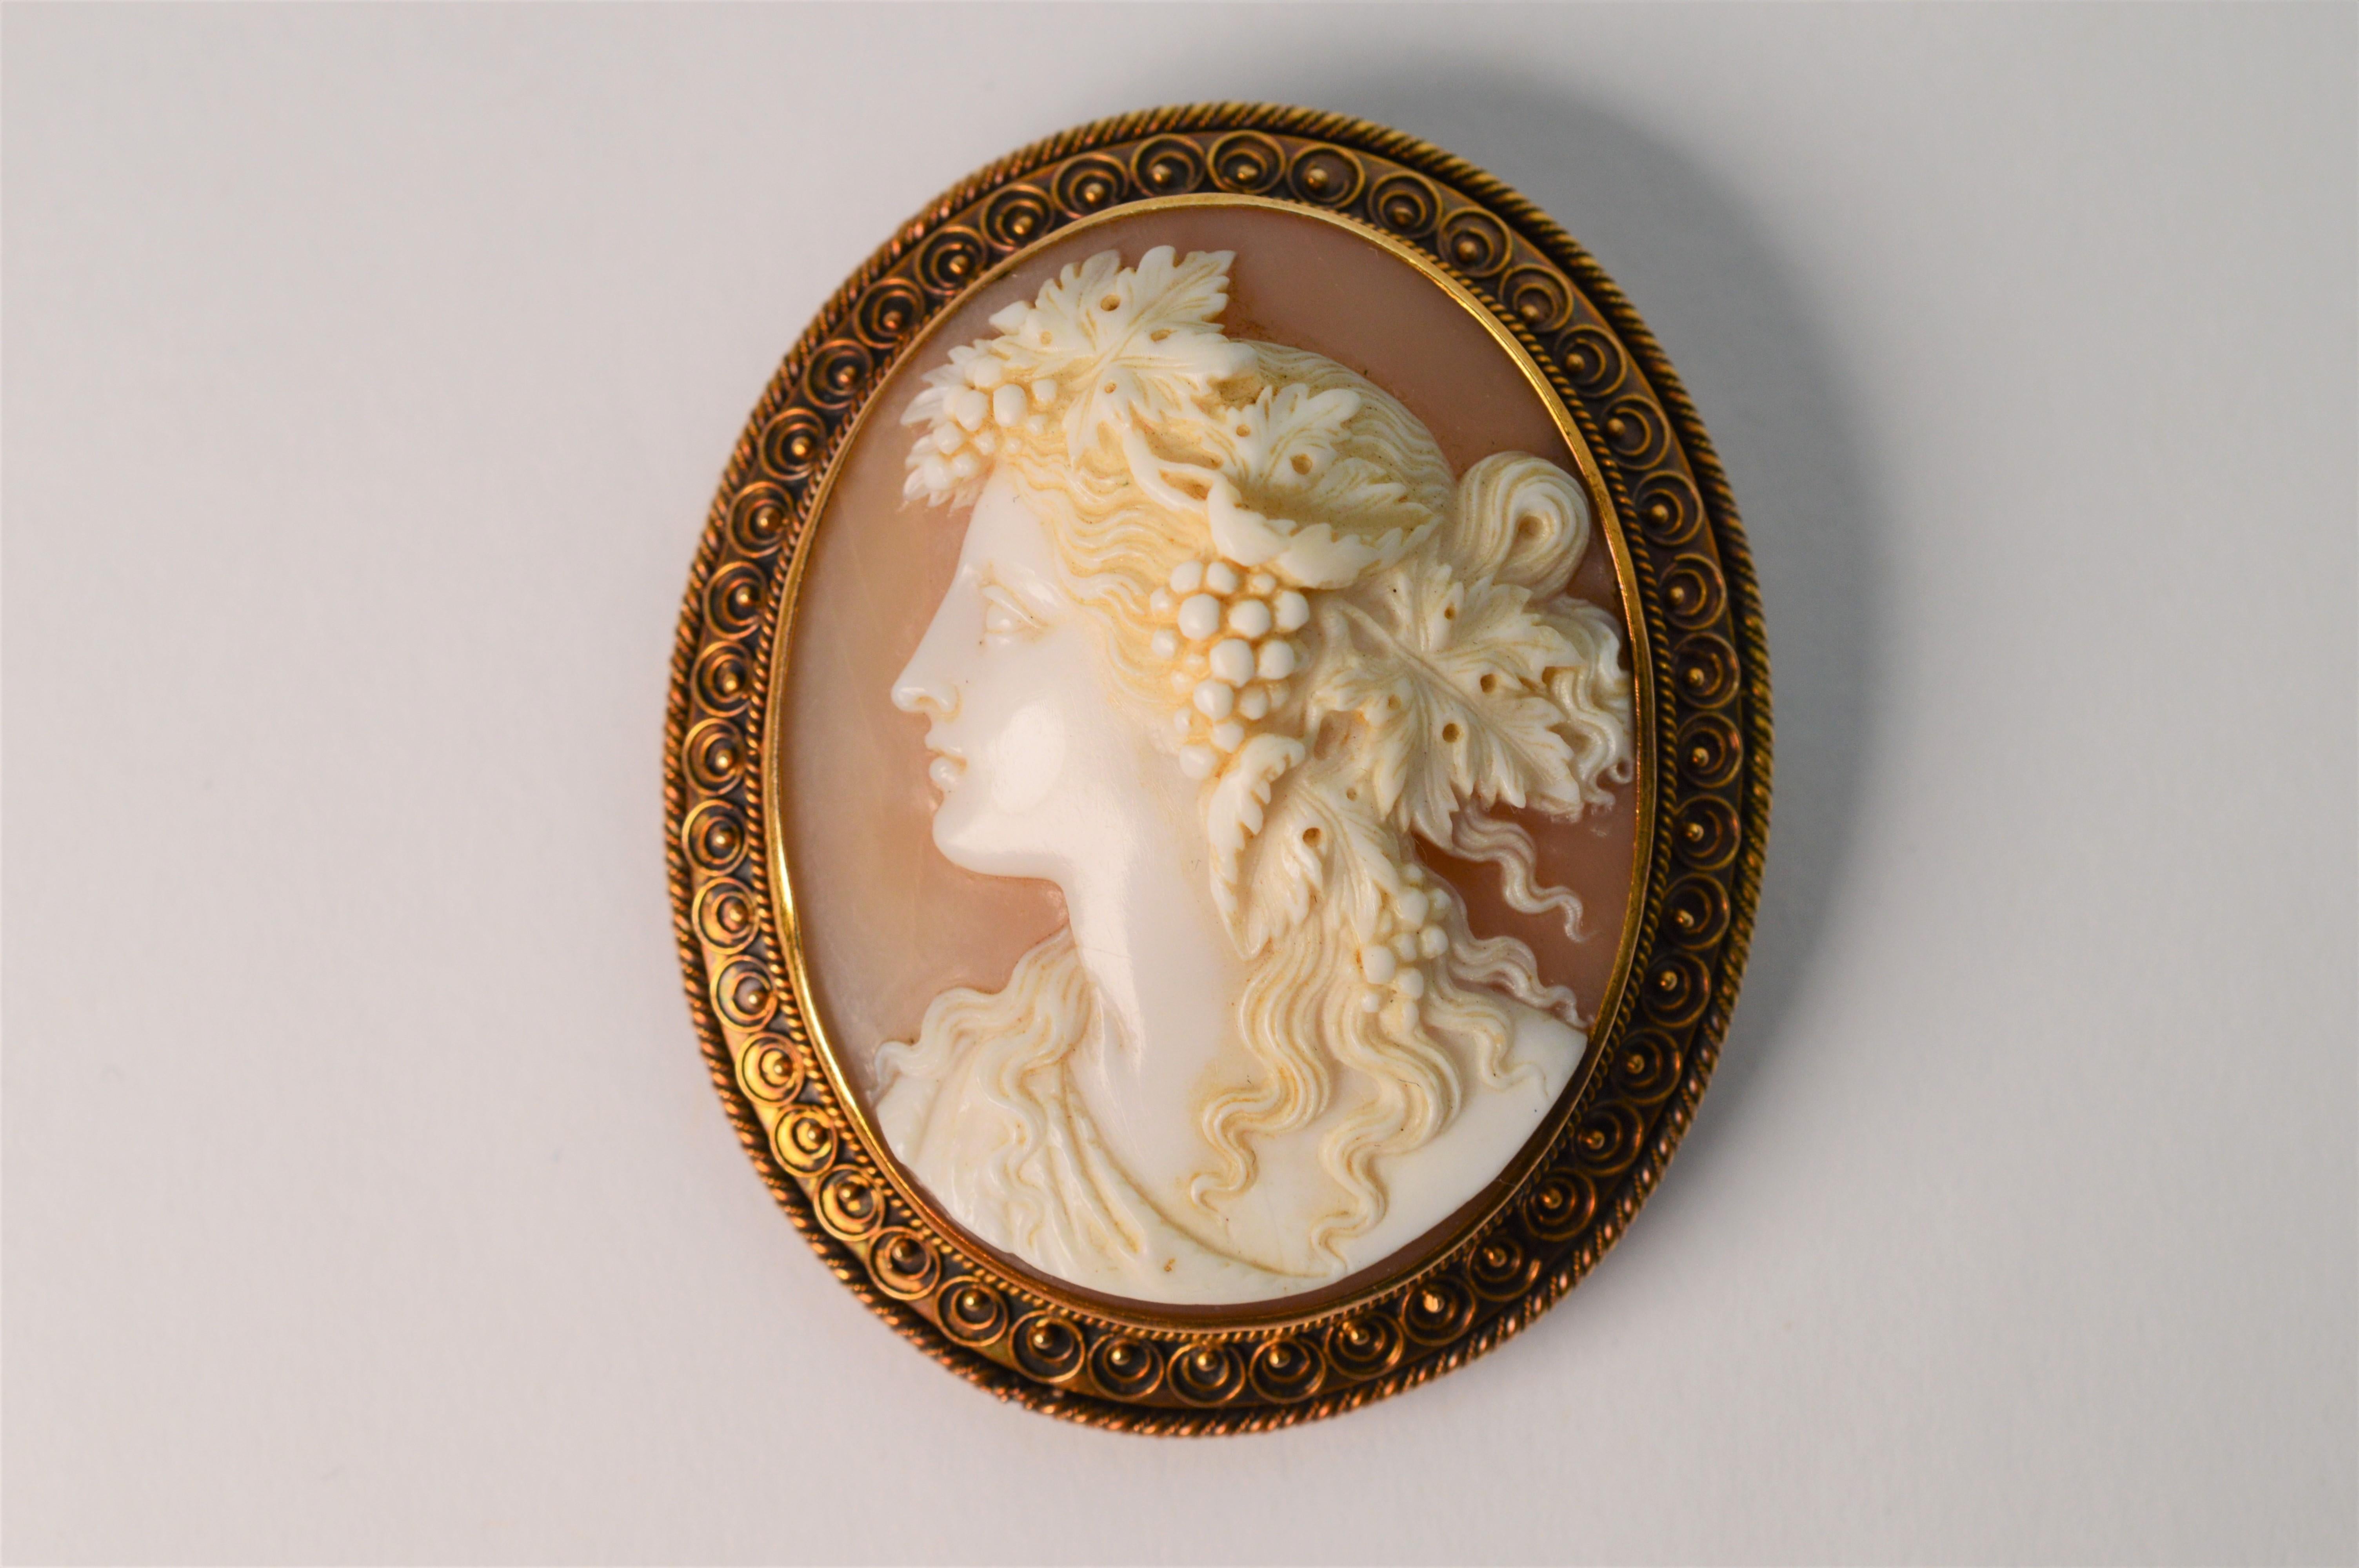 Finely hand carved in high relief with exquisite detail, this pre 1900 high art Italian made shell cameo brooch displays the pose of a Contessa with beautiful flowing hair elegantly adorned with flora. 
This fine oval carving is framed in eighteen